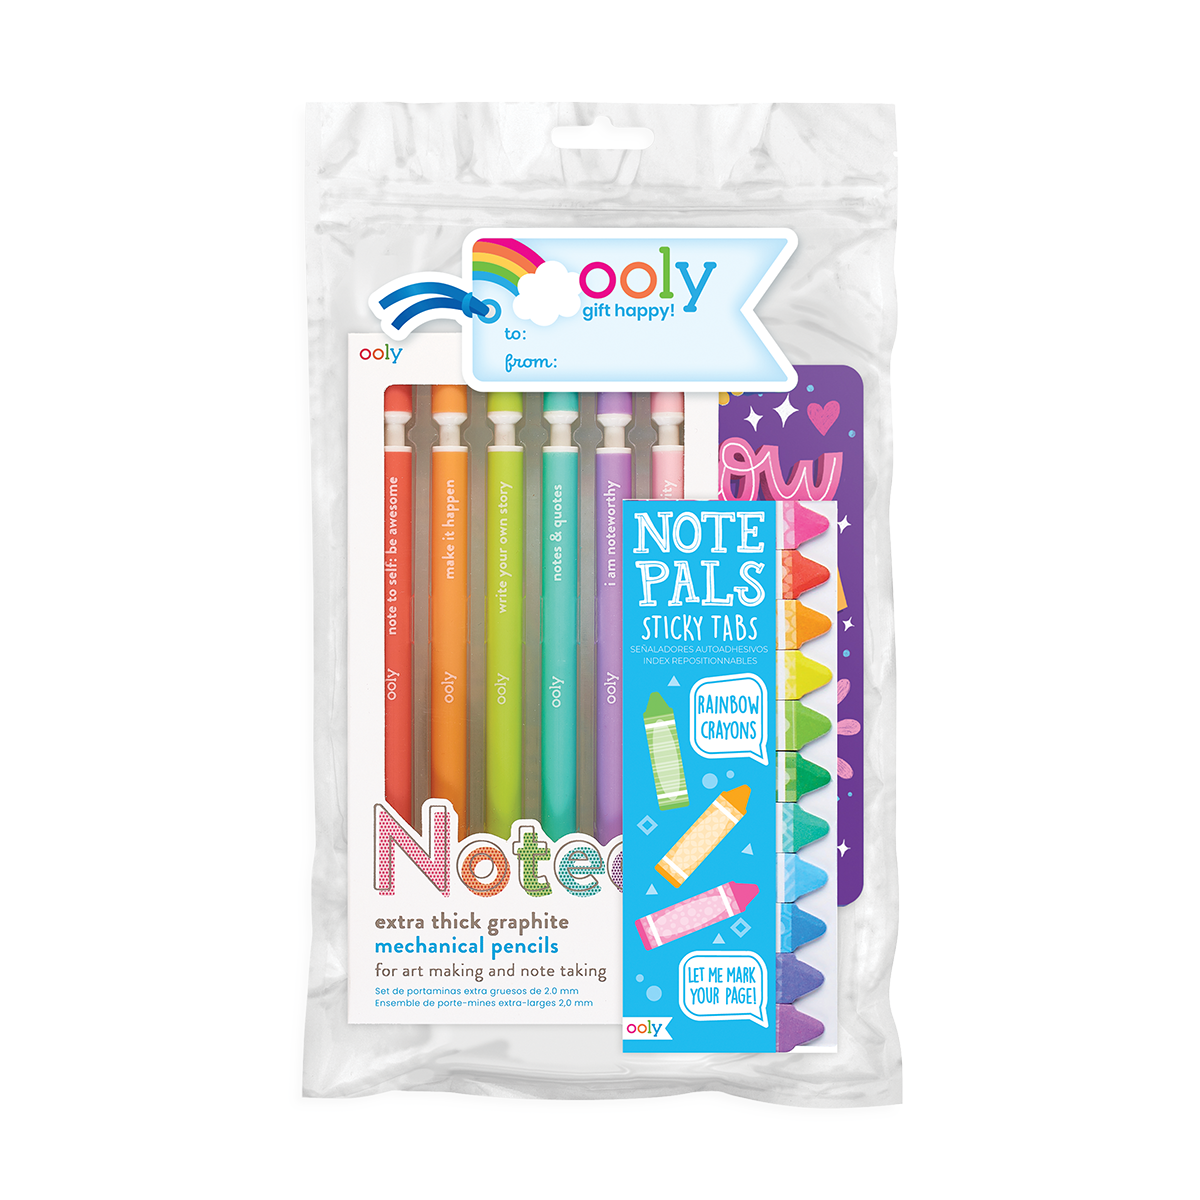 ooly Art Supplies Starting at $5.99 + Buy 2 Get 1 Free + Extra 10